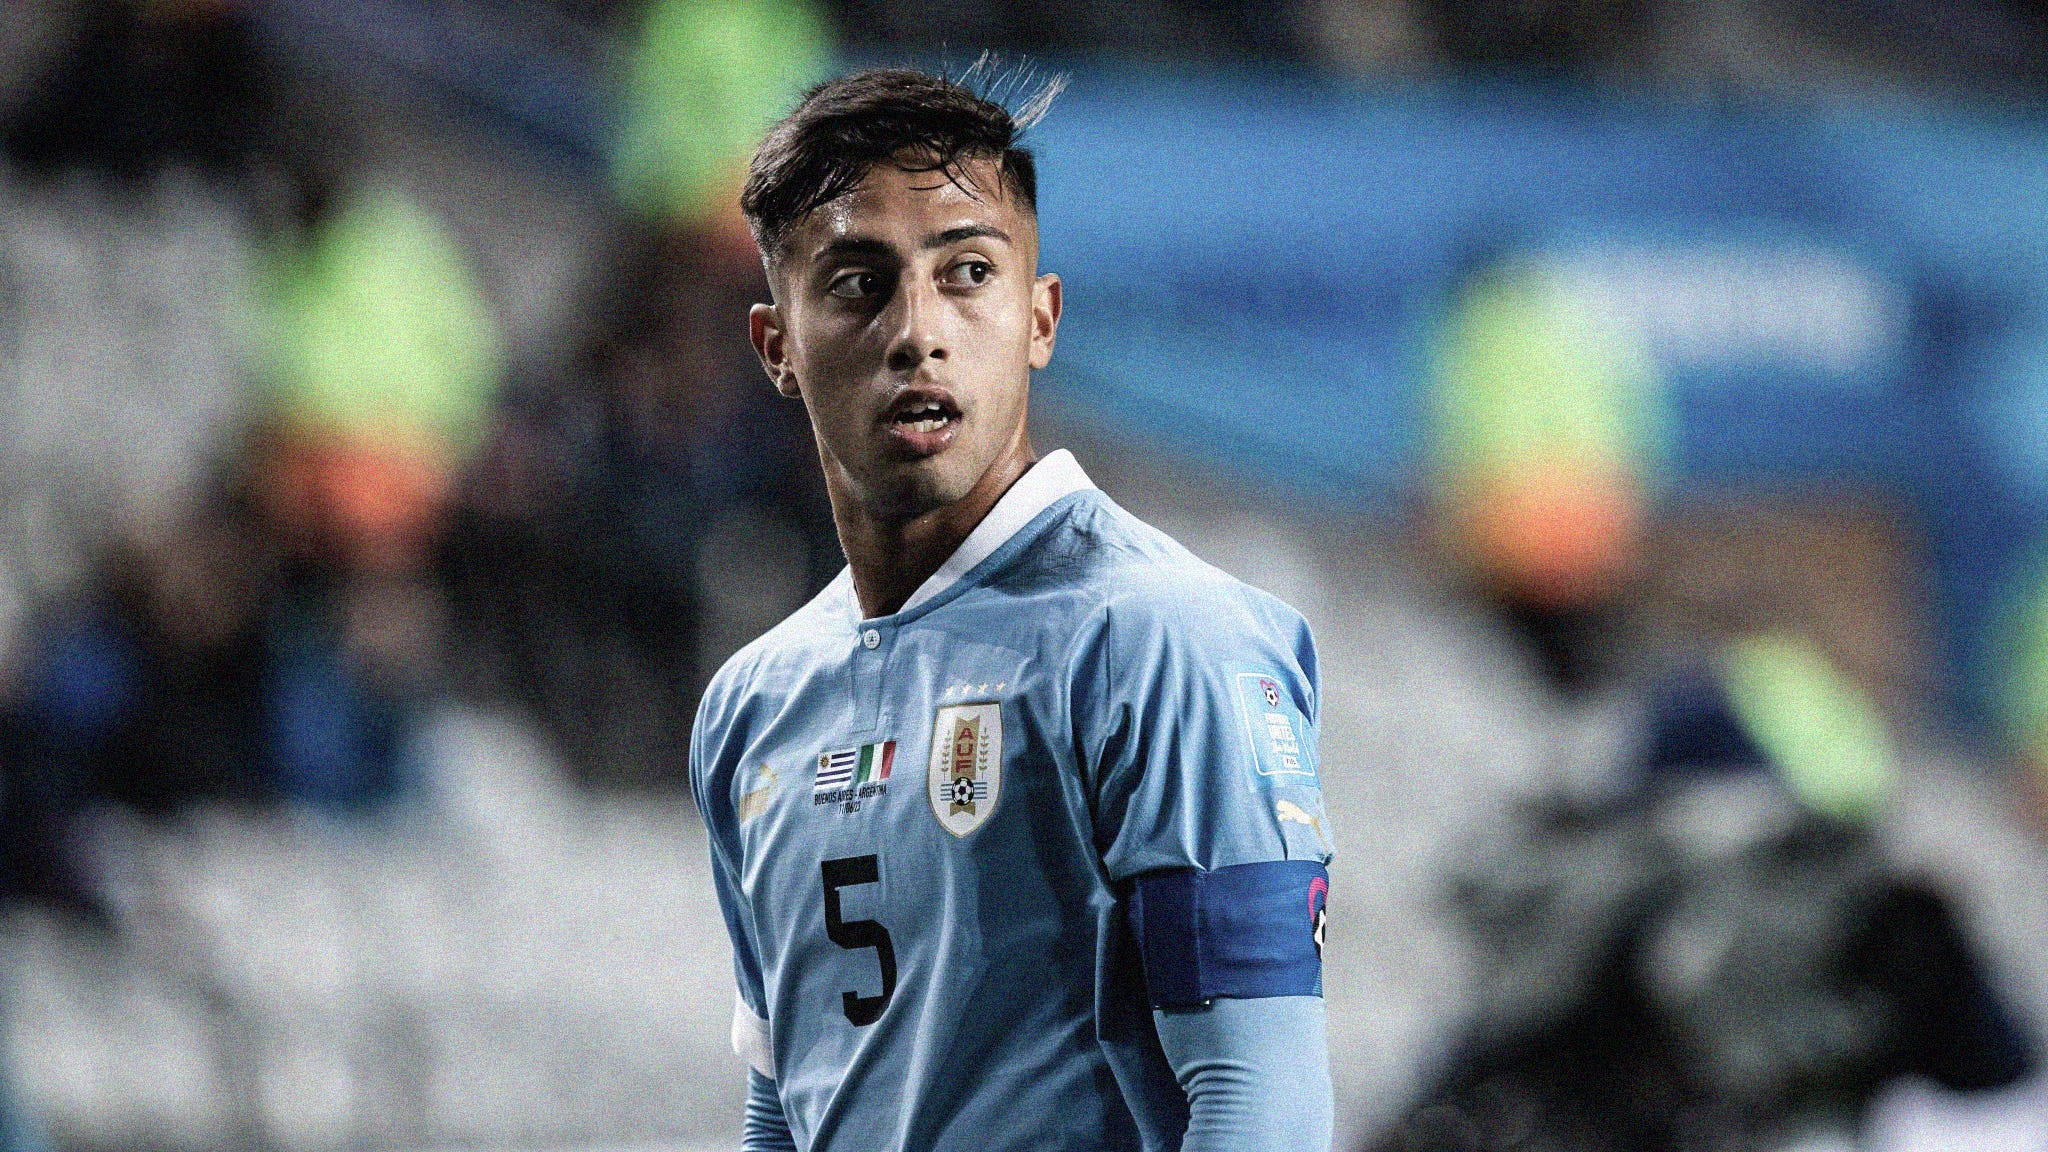 A photo of Uruguay's Fabricio Díaz wearing the captain's armband at the 2023 FIFA U-20 World Cup